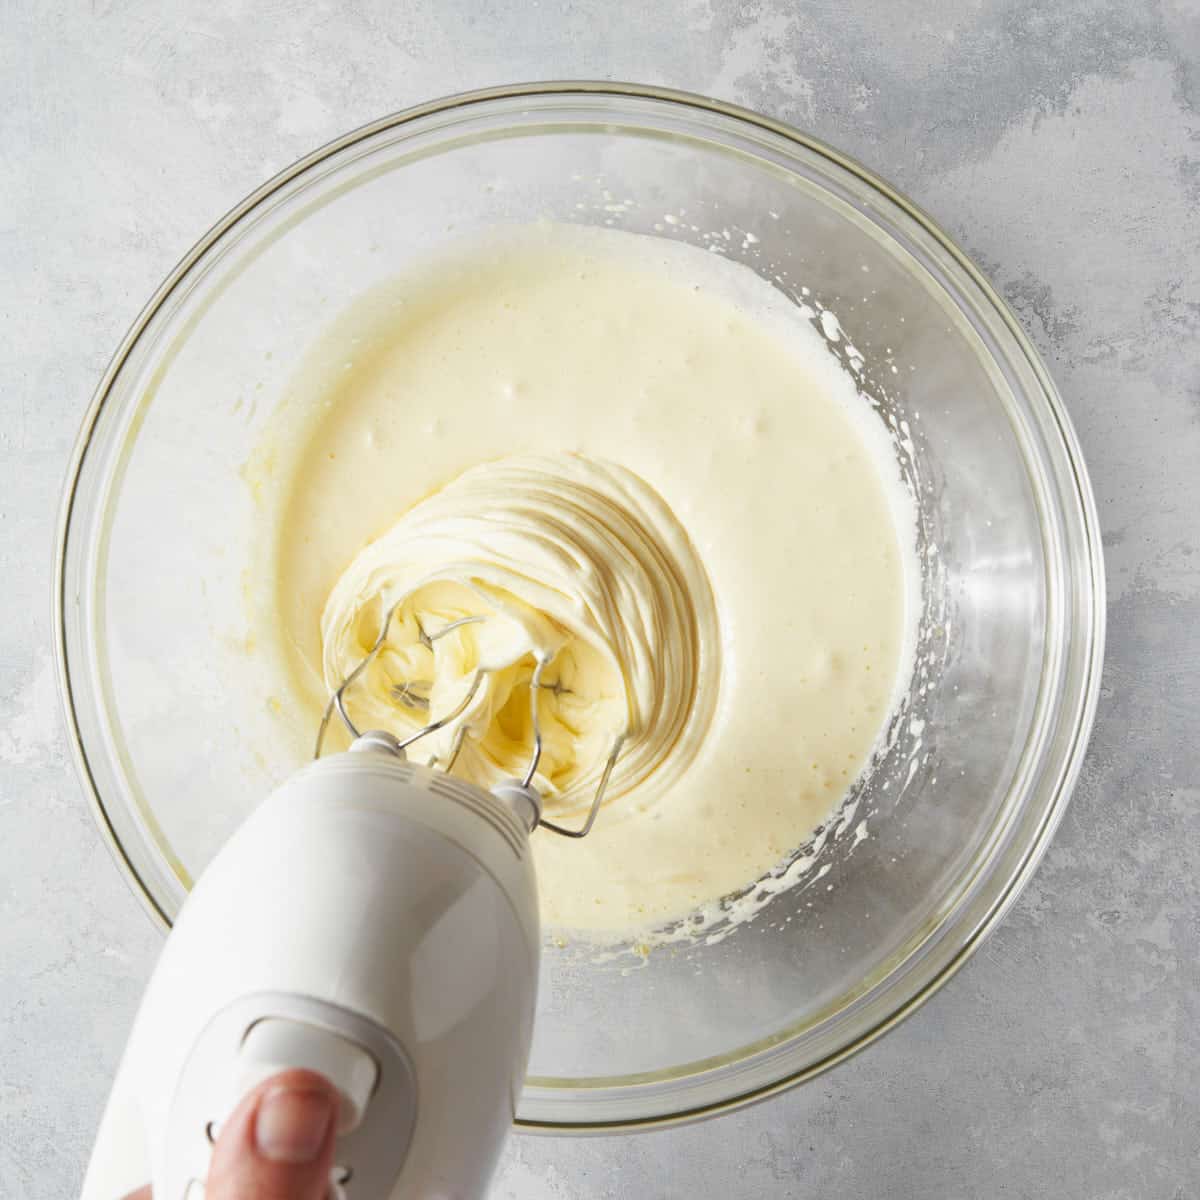 Whisk eggs and sugar with the electric mixer